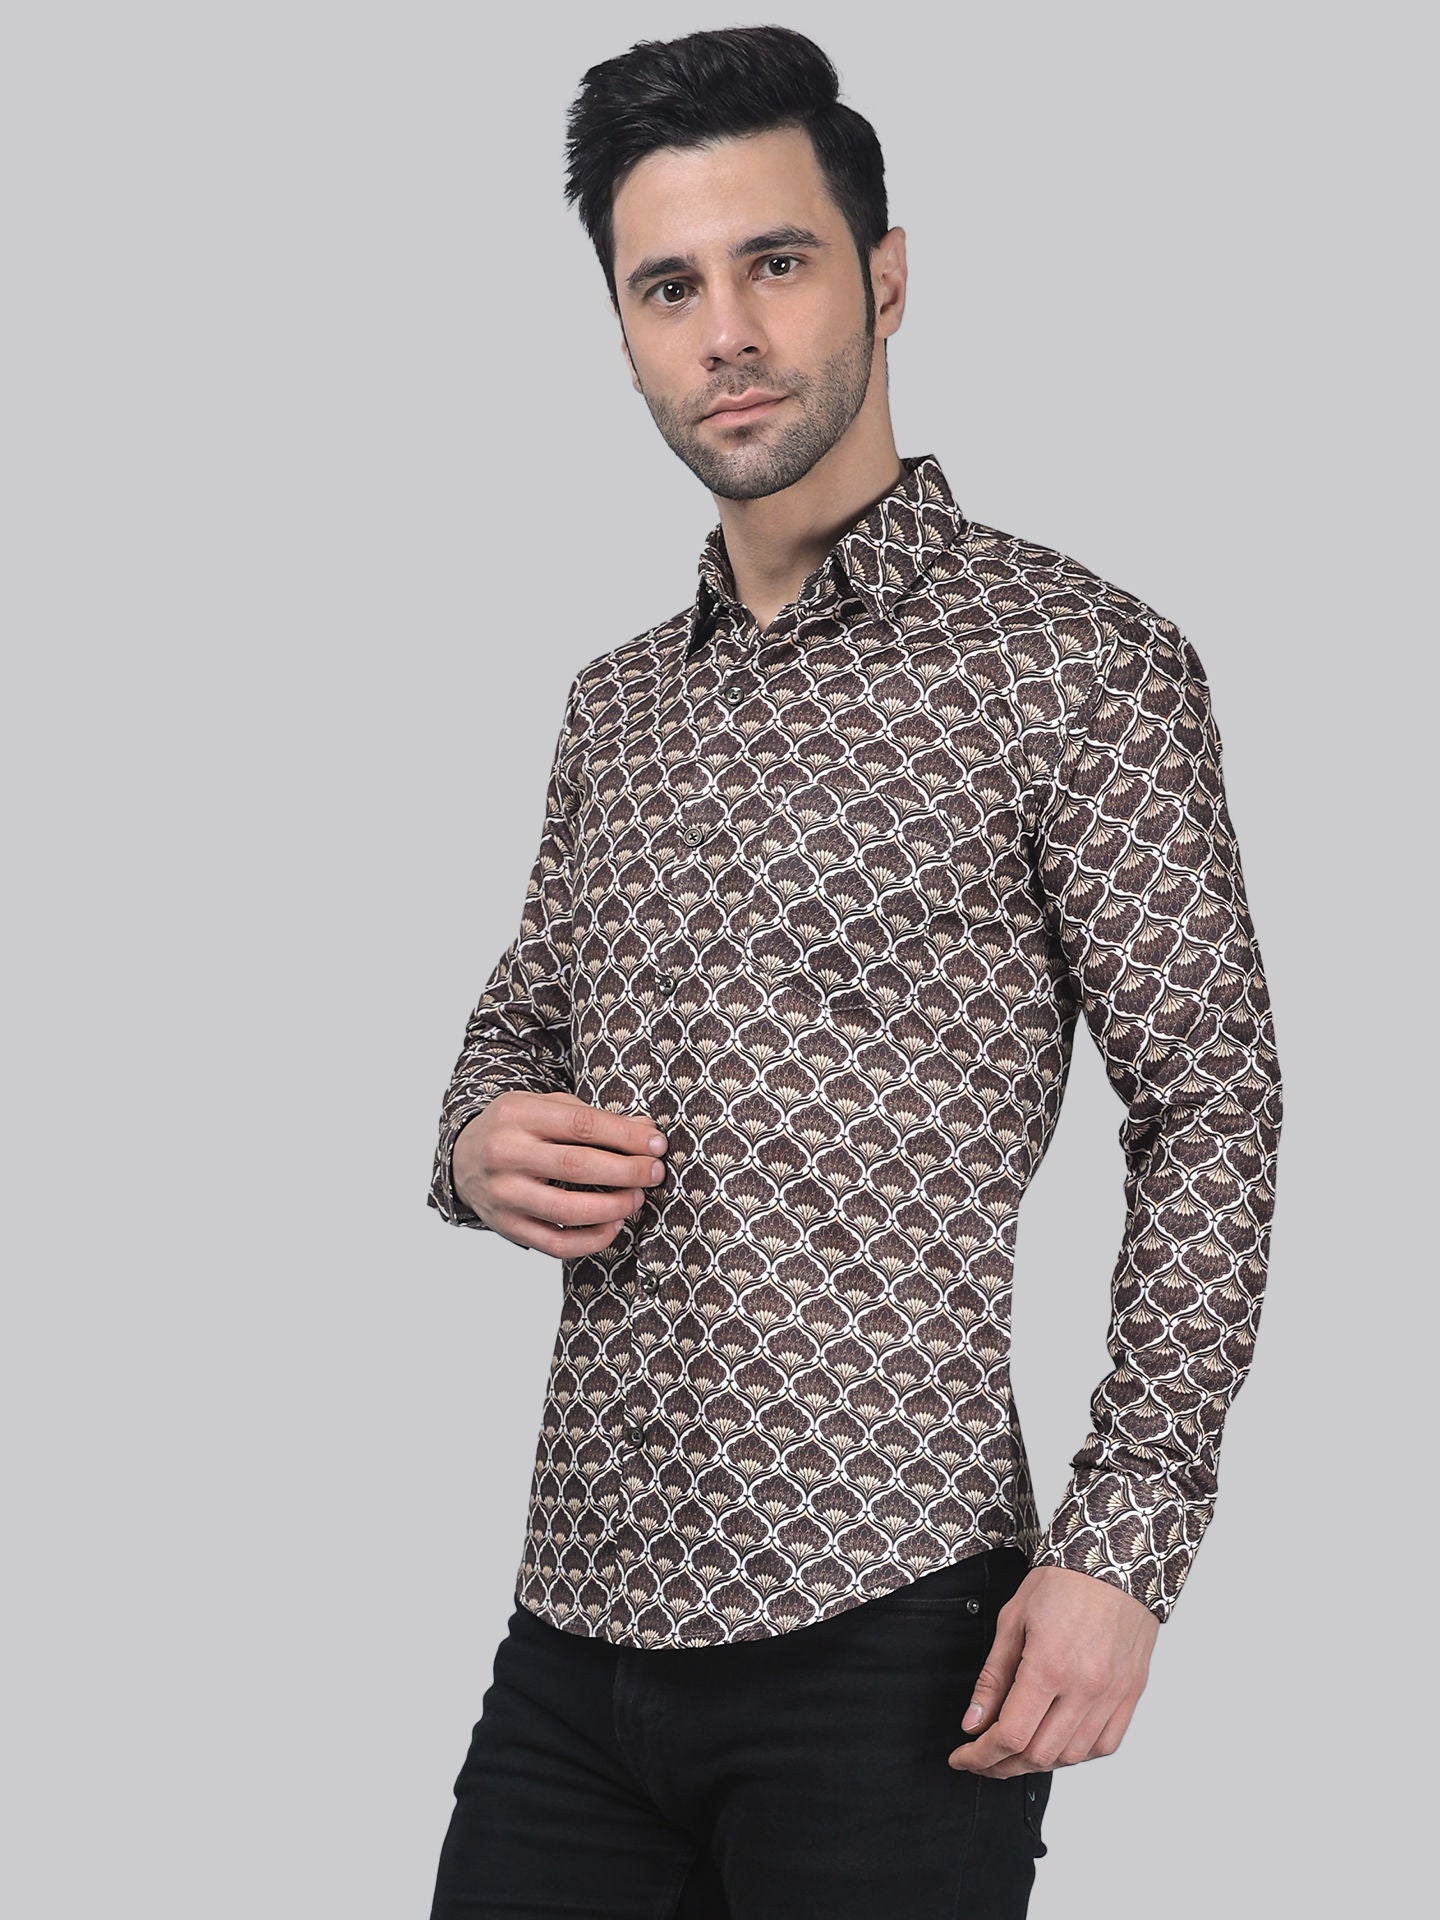 TryBuy Fancy Full Sleeve Casual Linen Printed Shirt for Men - TryBuy® USA🇺🇸